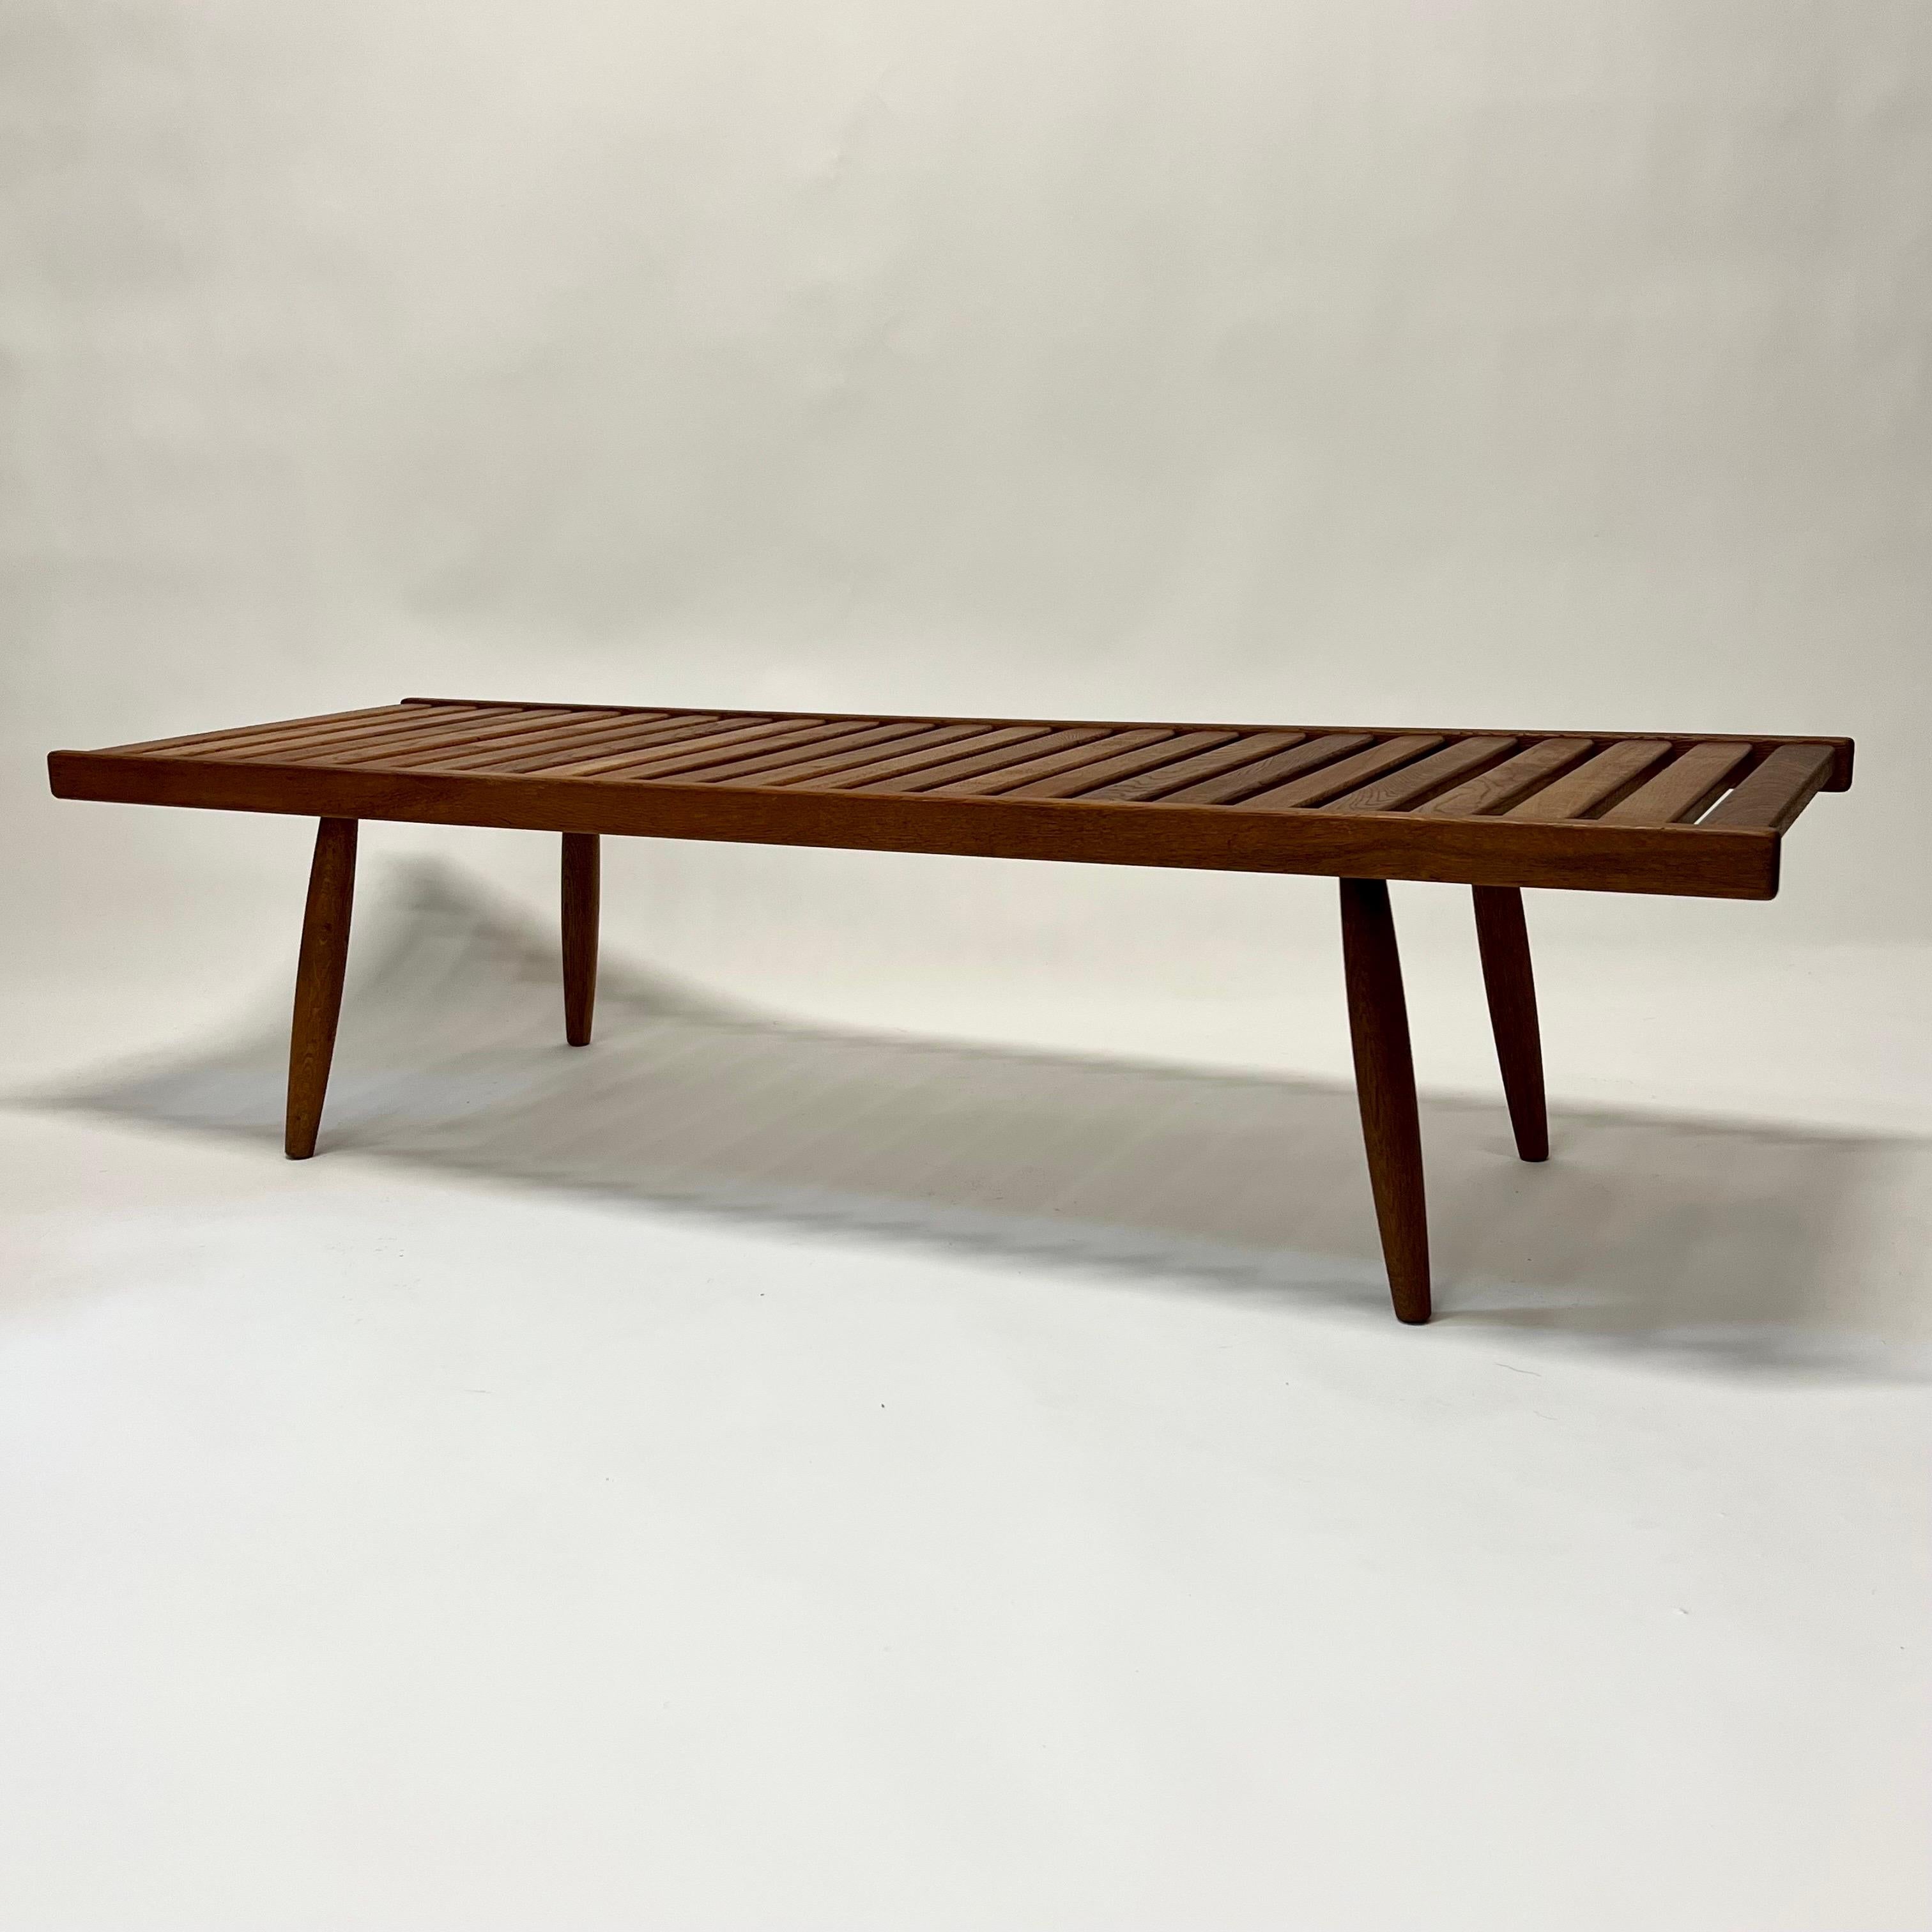 Stunning Mid-Century Modernist slat coffee table manufactured by AFM circa 1960s, Japan. Clean lines, beautiful patinated oak with double tapered sculpted legs.